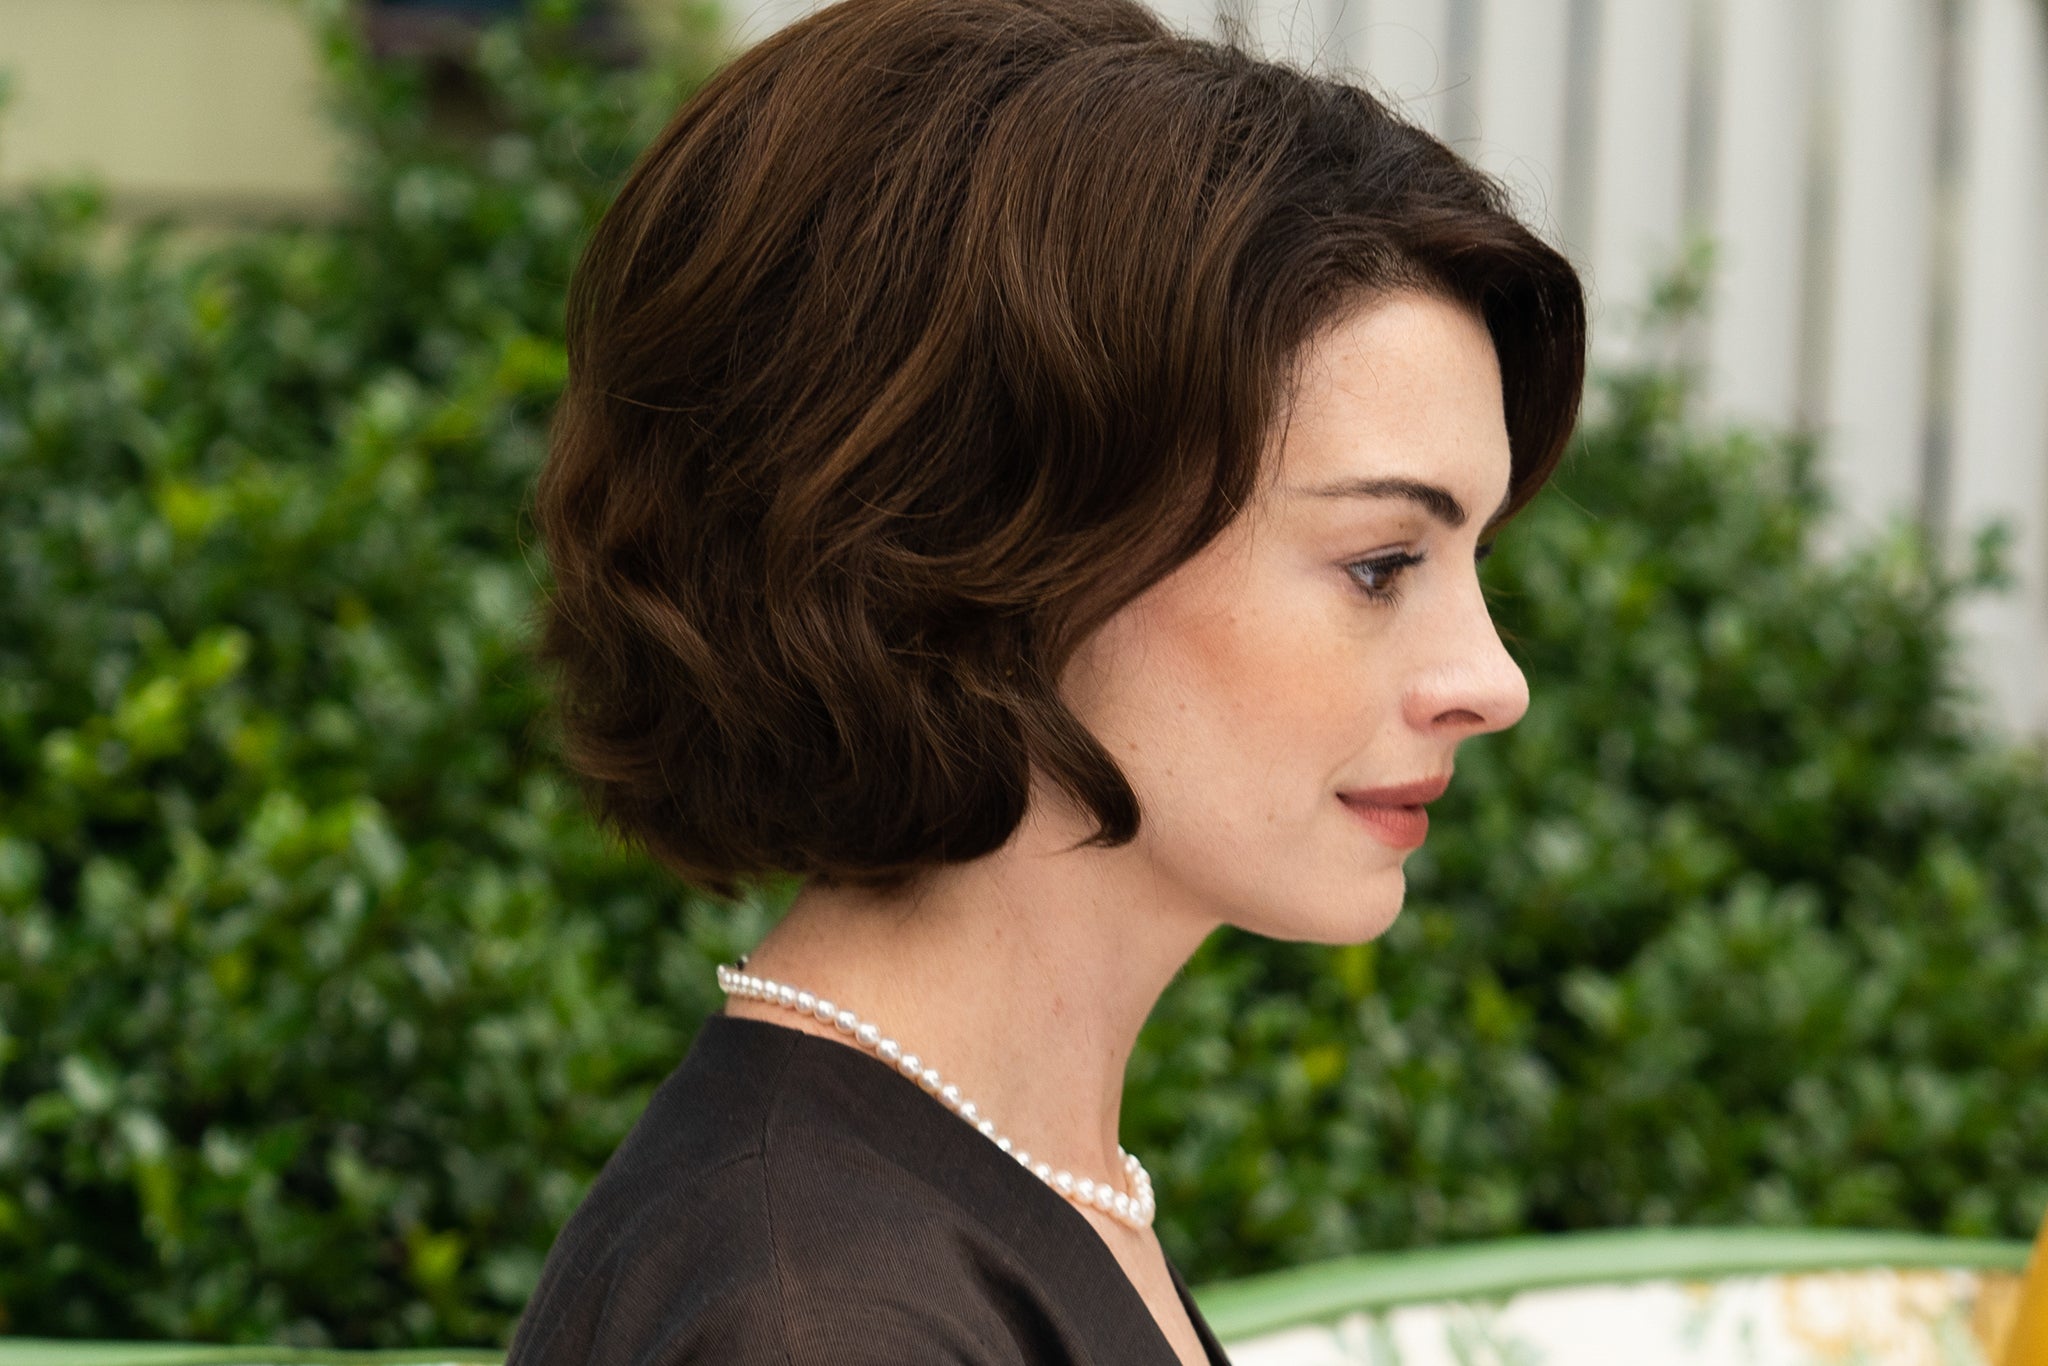 Stylish and sinister: Anne Hathaway in ‘Mothers’ Instinct’